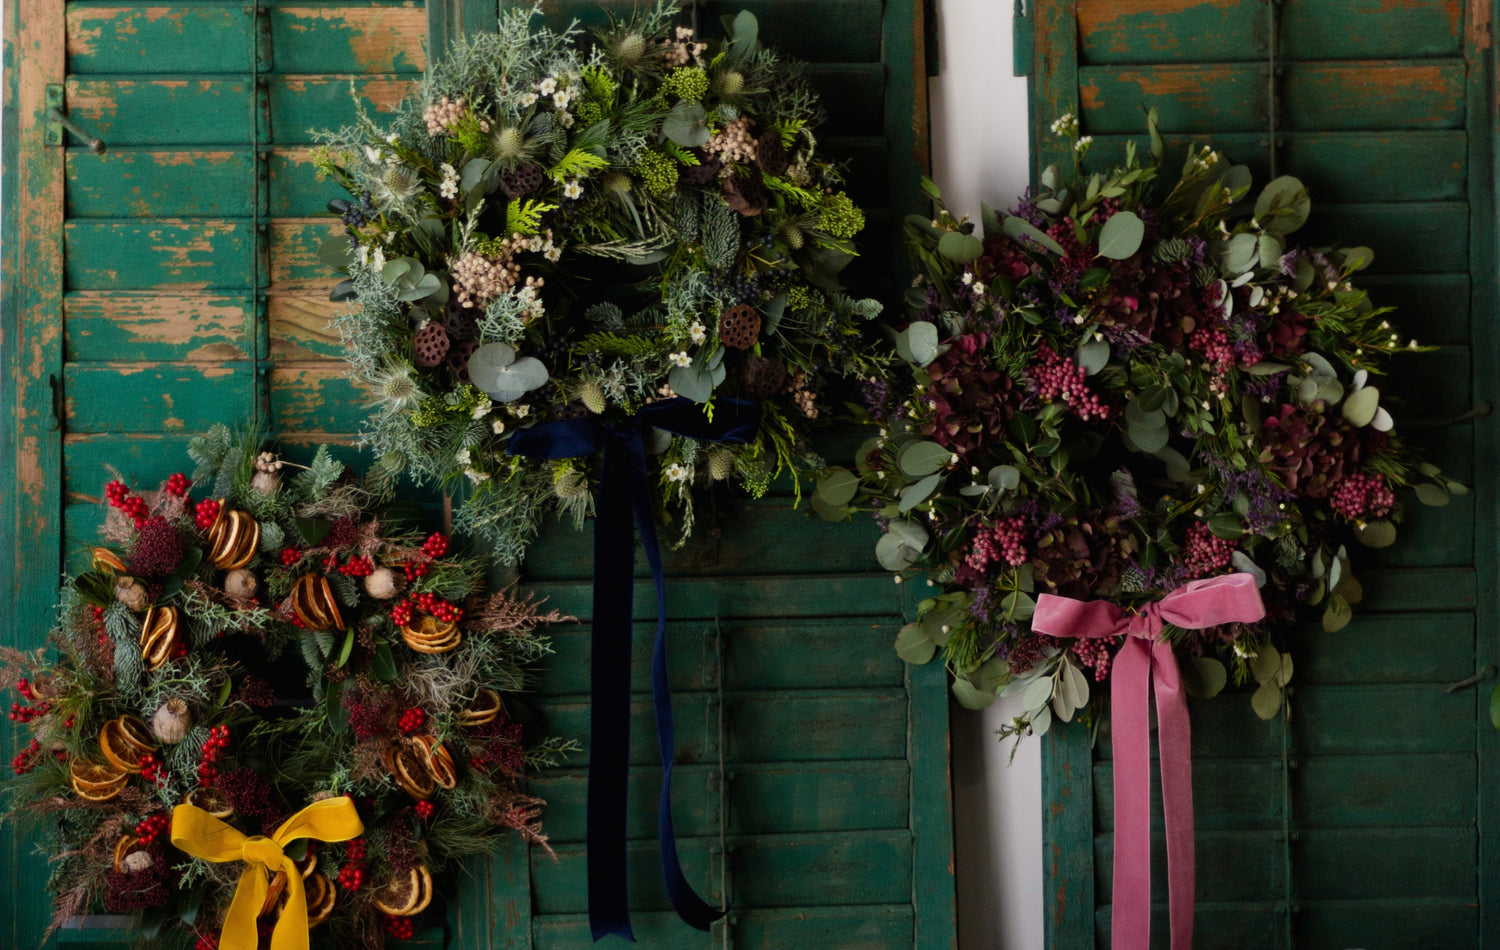 The Wreath Collection